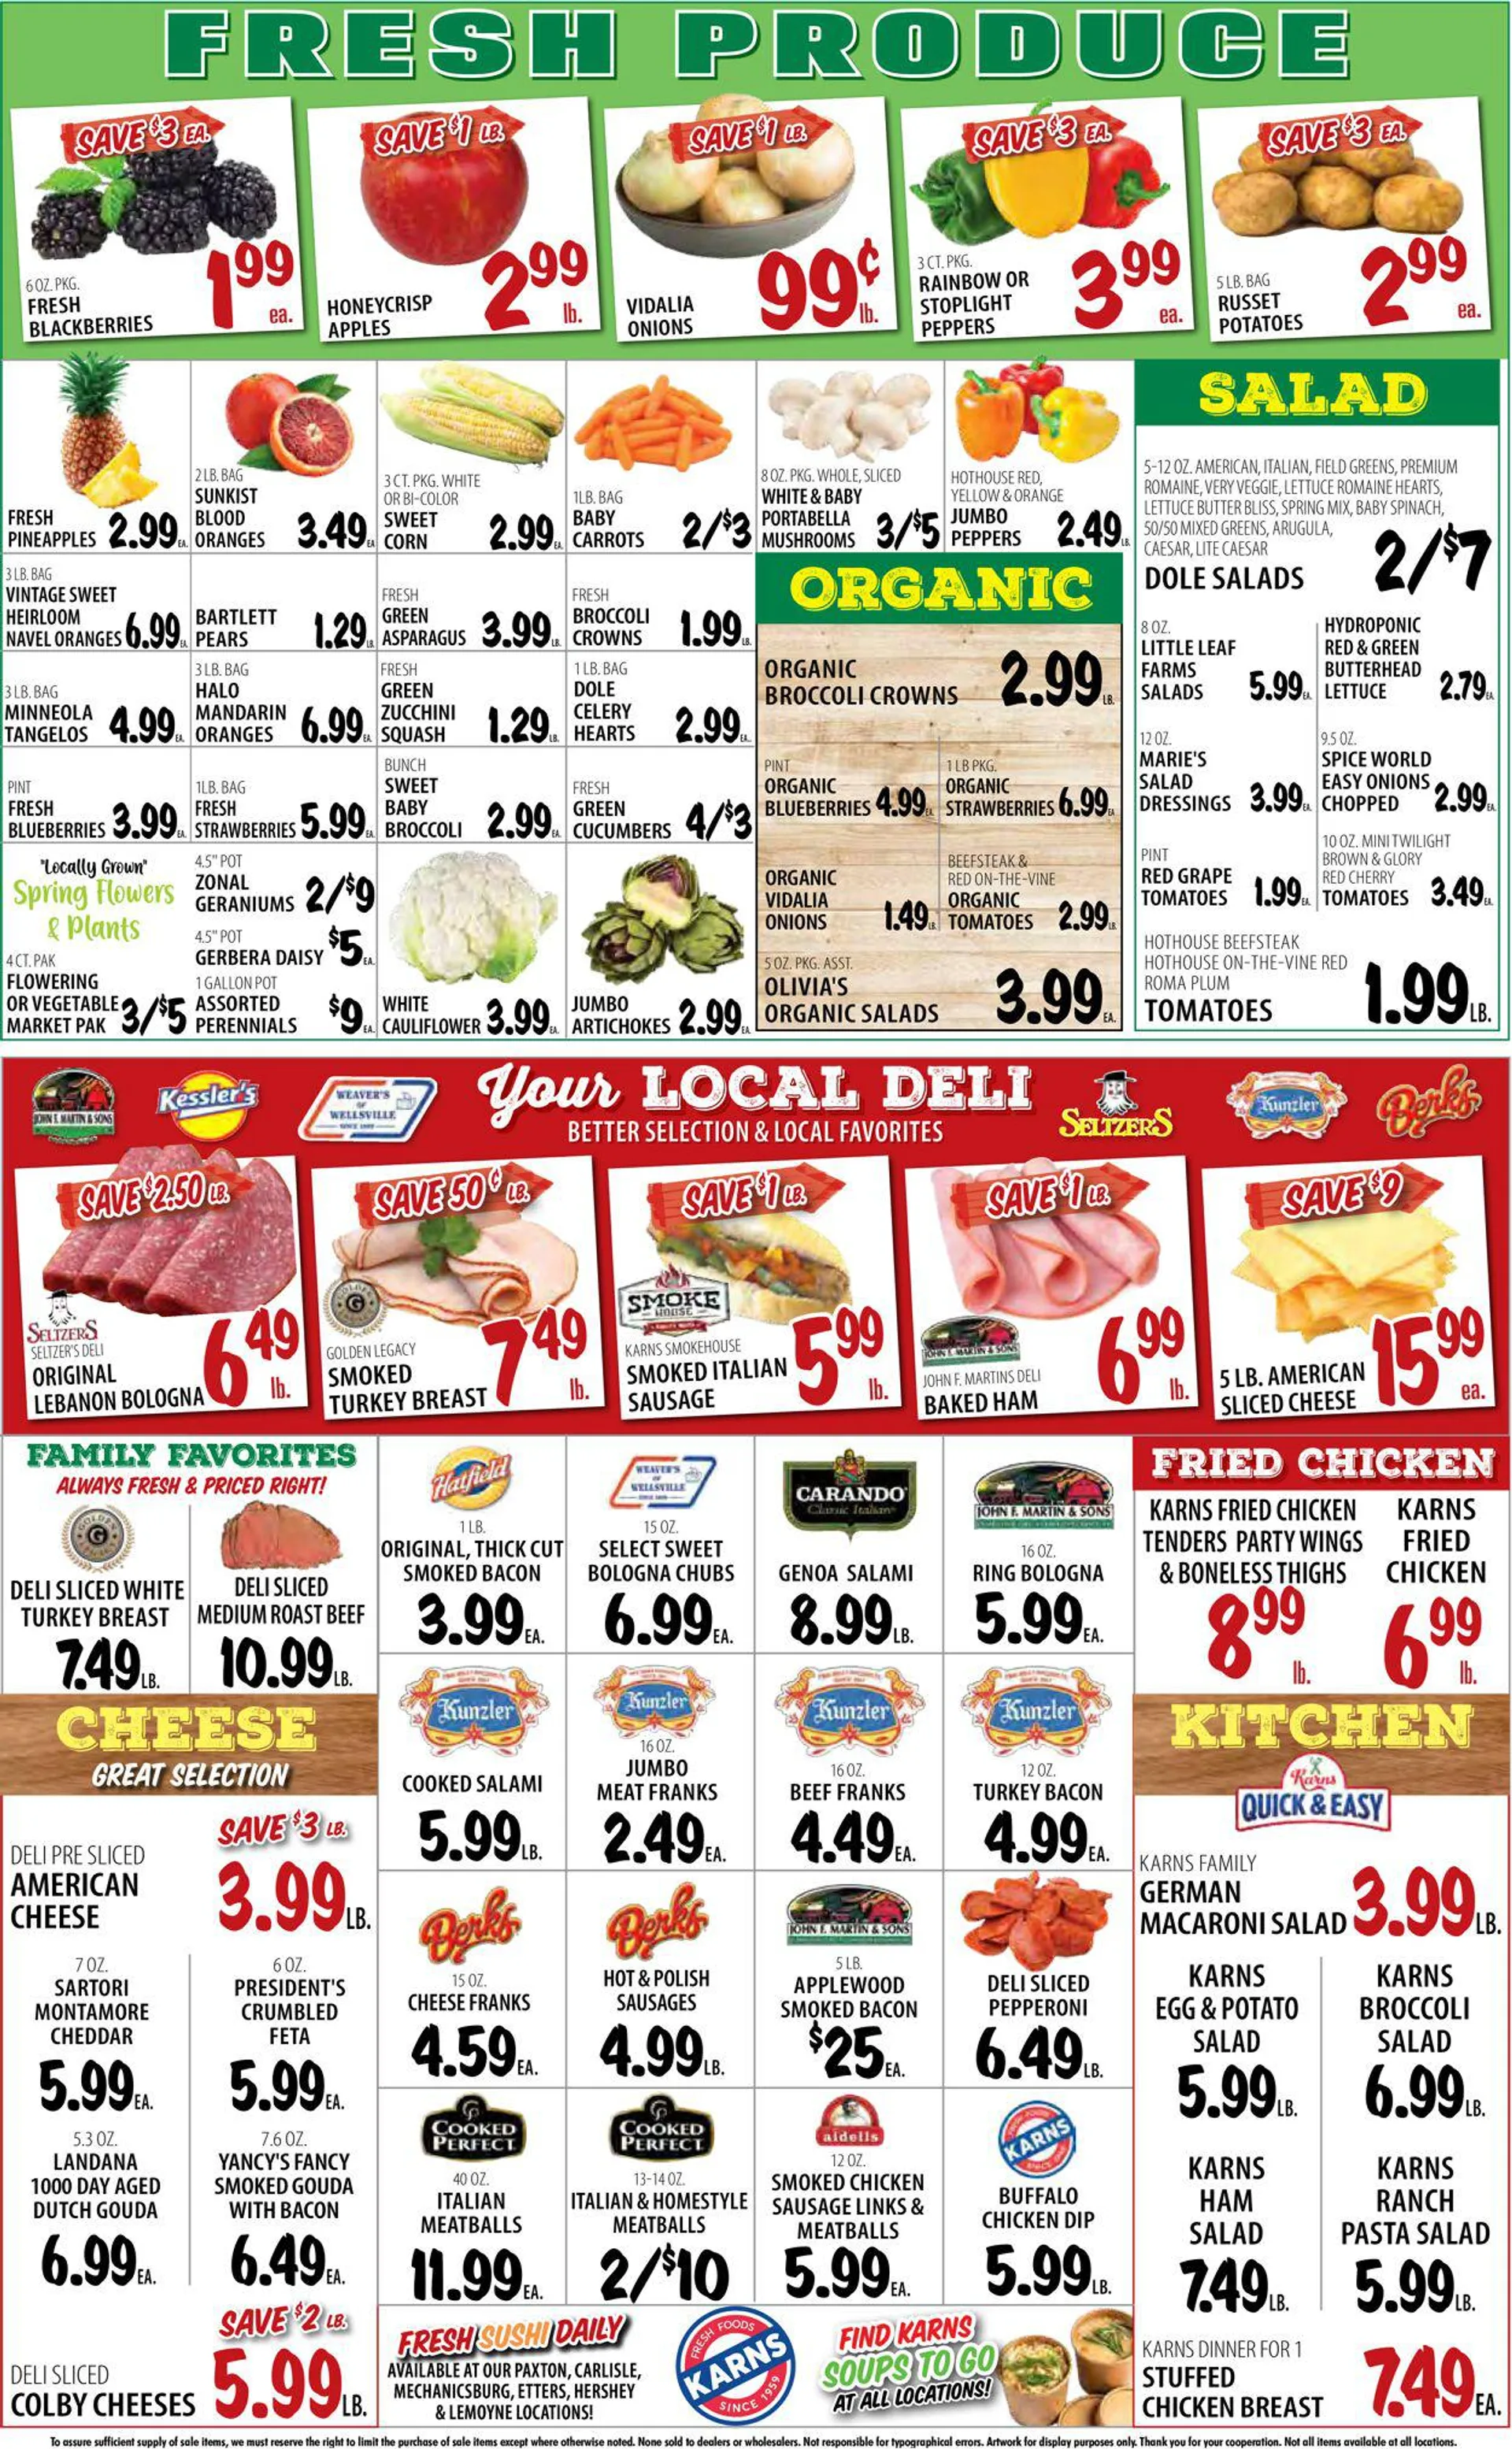 Karns Quality Foods Current weekly ad - 4